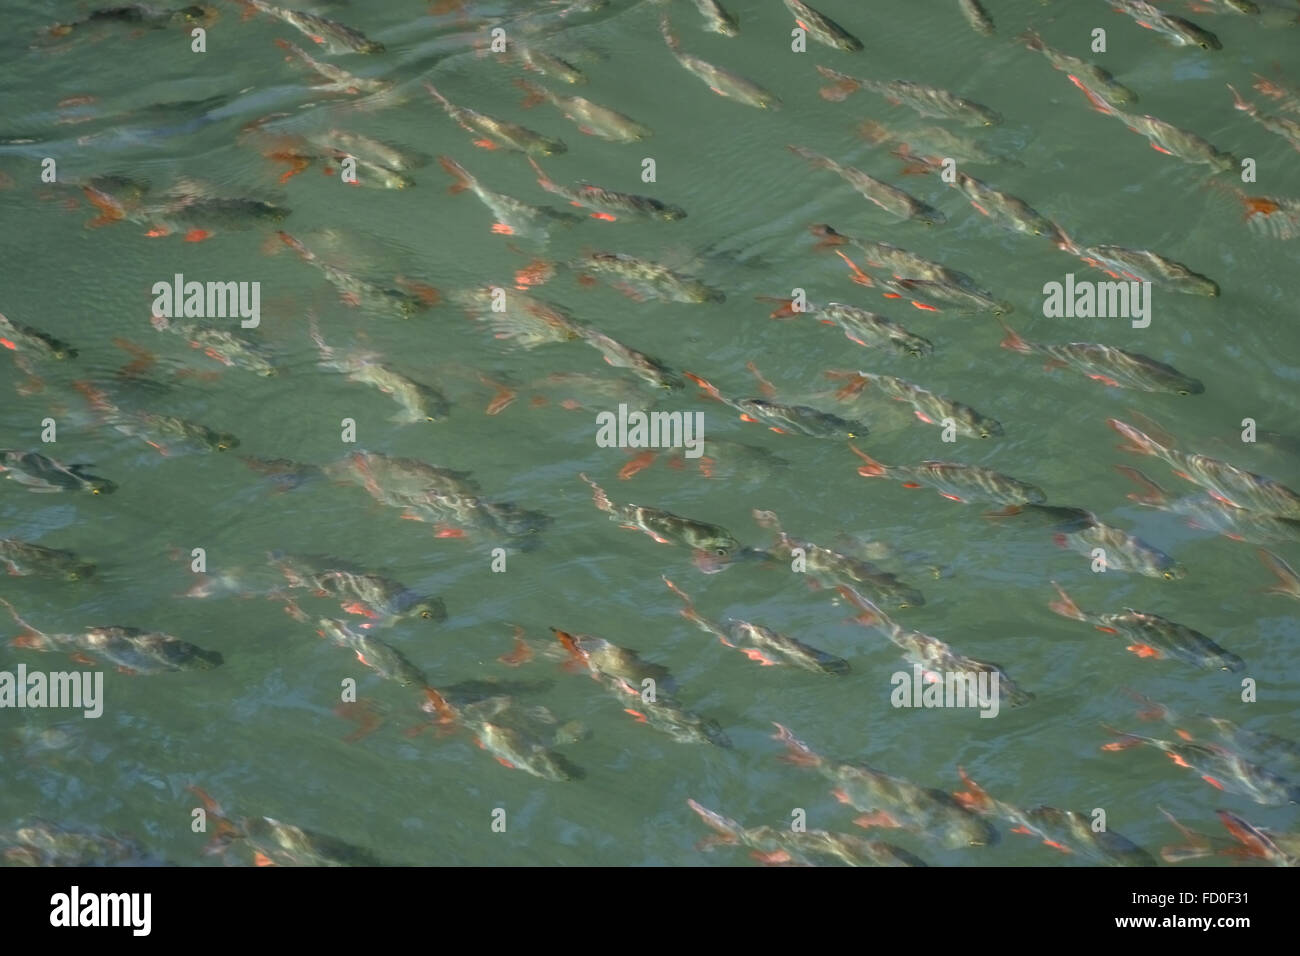 infoil barbs, Barbonymus schwanenfeldii, a shoal of fish swimming in the shallow water on the River Kwai Stock Photo